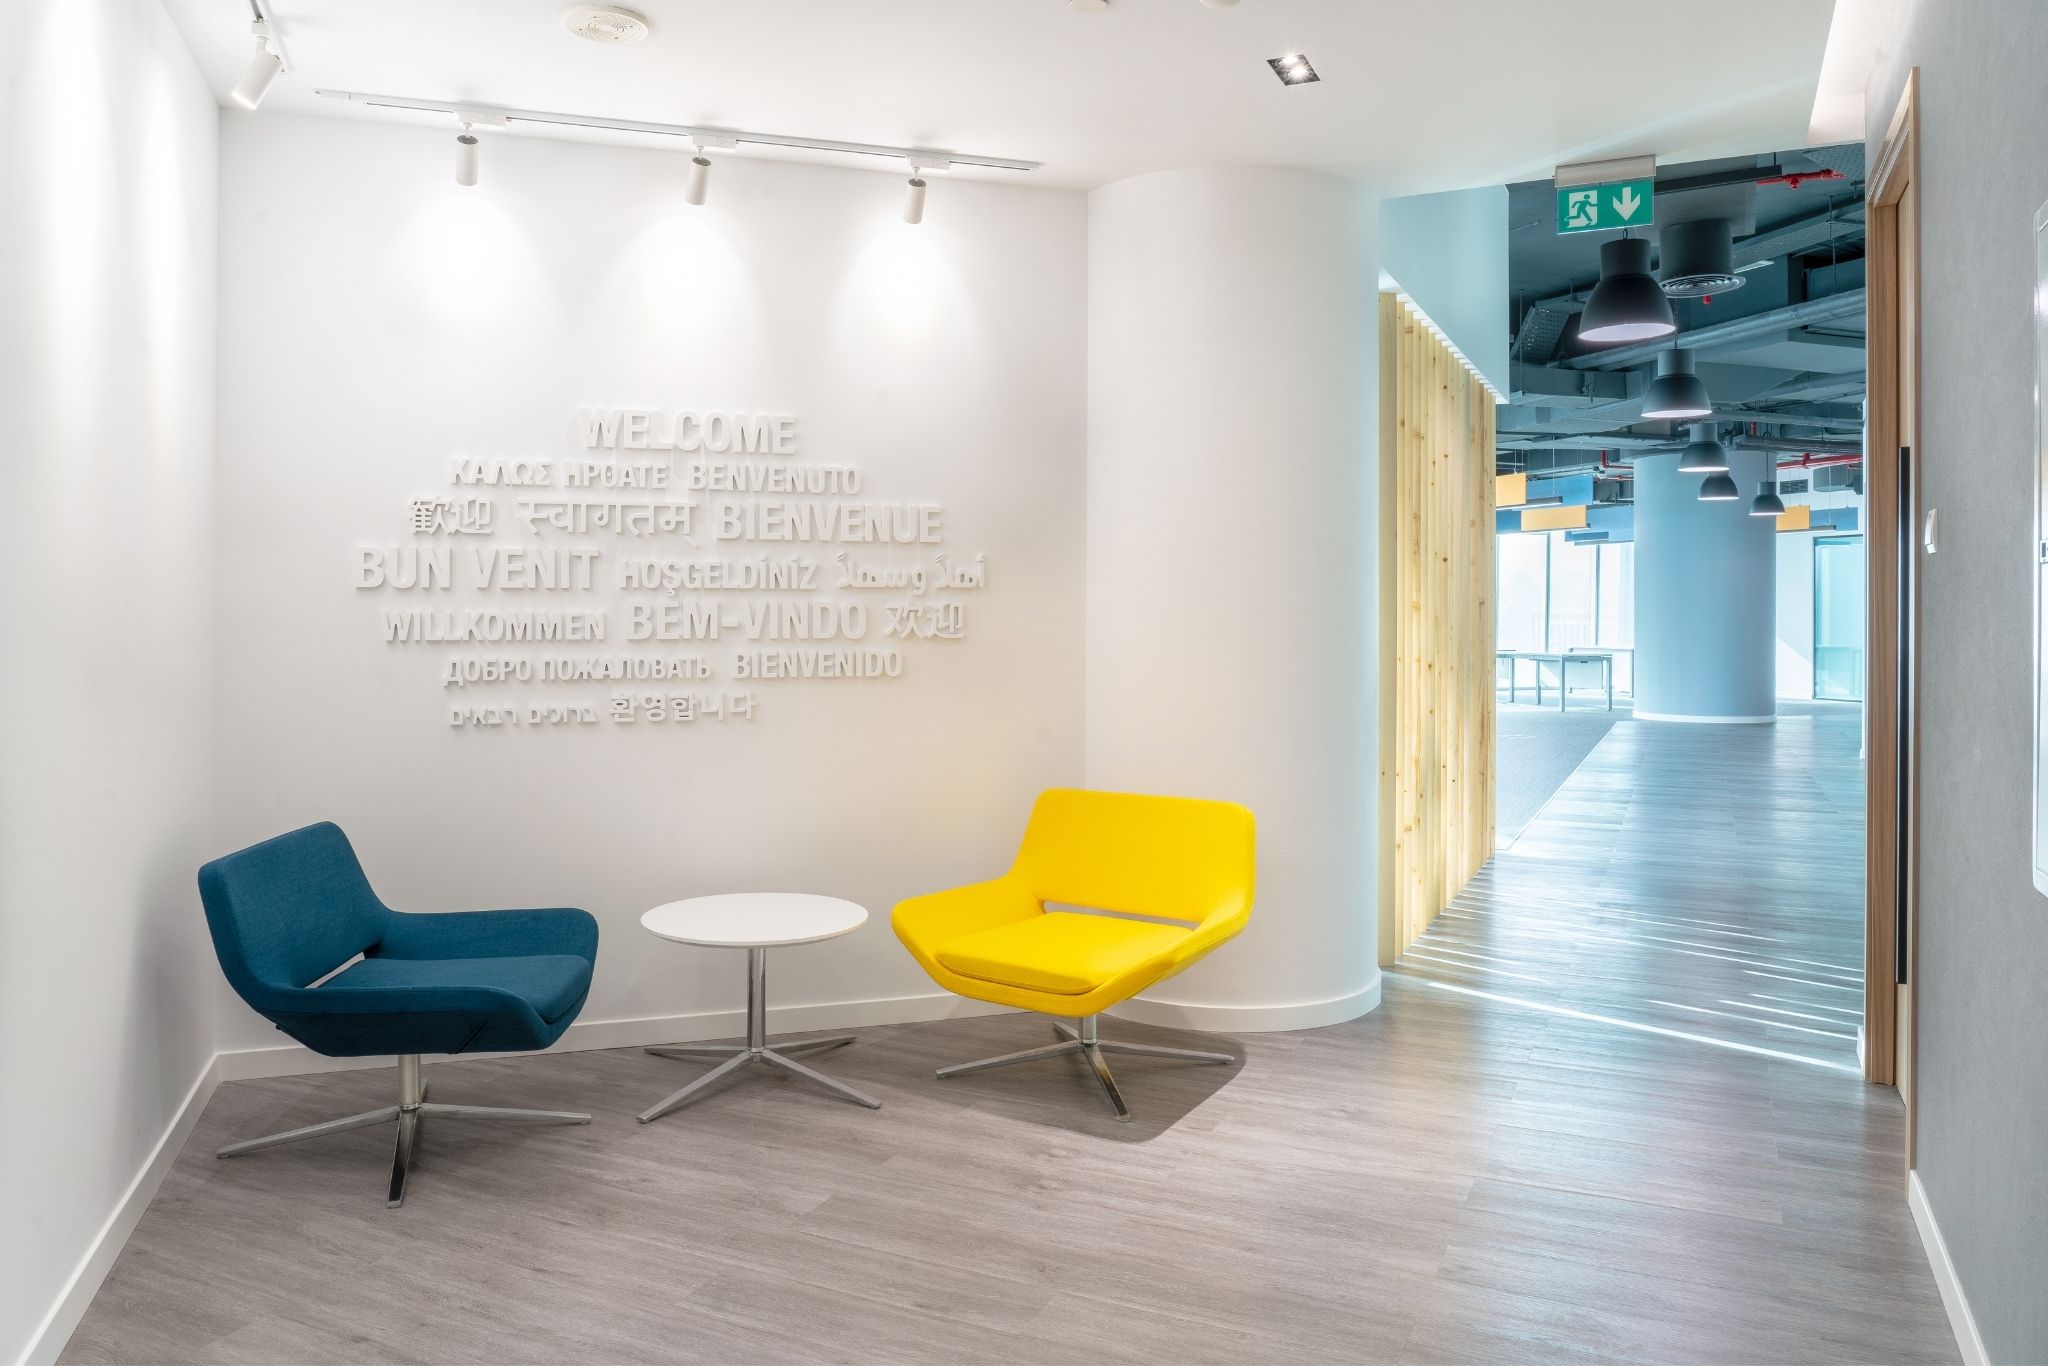 Renault regional office in Dubai design and build by Motif Interiors7